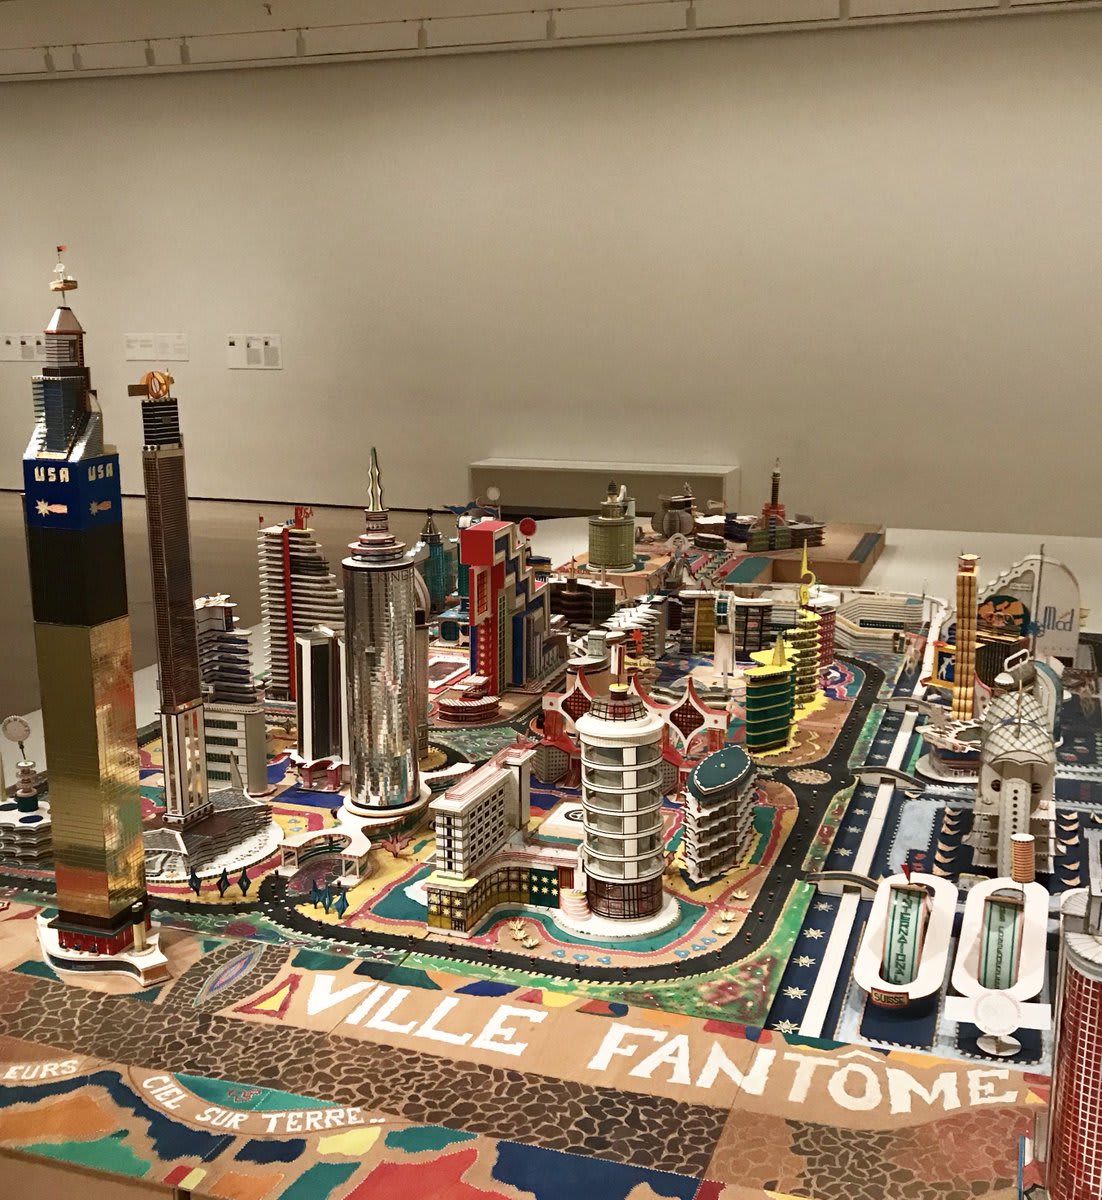 In his largest cityscape, “Ville Fantôme” (1996), Kingelez makes his utopian vision of the world an earthly reality. Now on view in